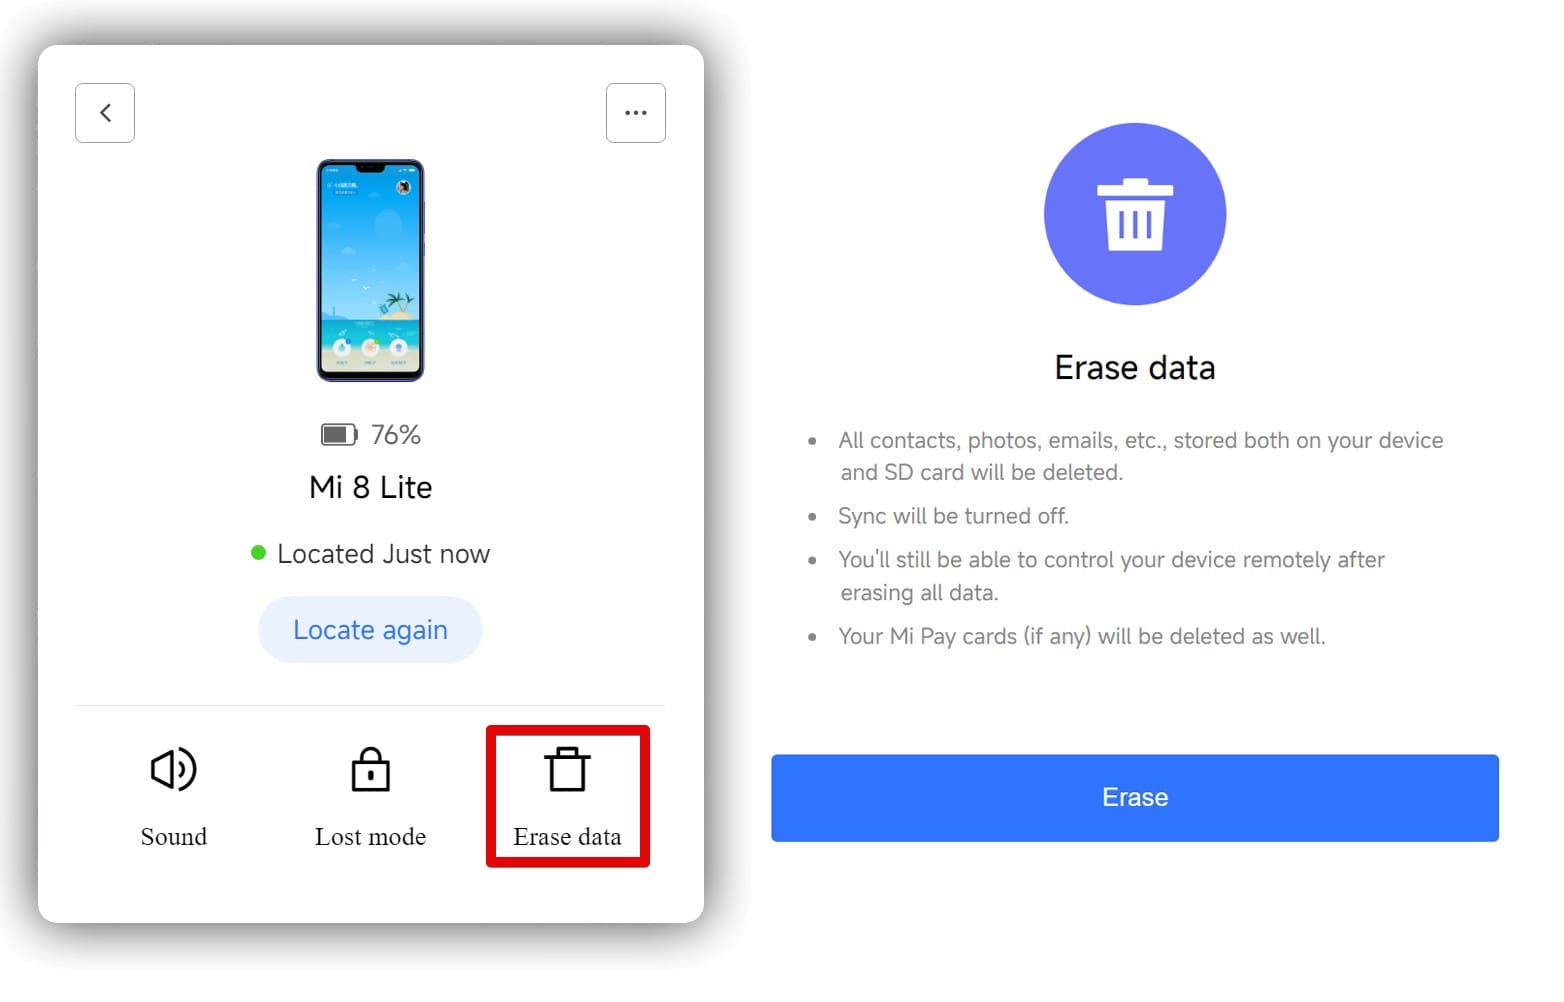 Find My Device image with data erase function